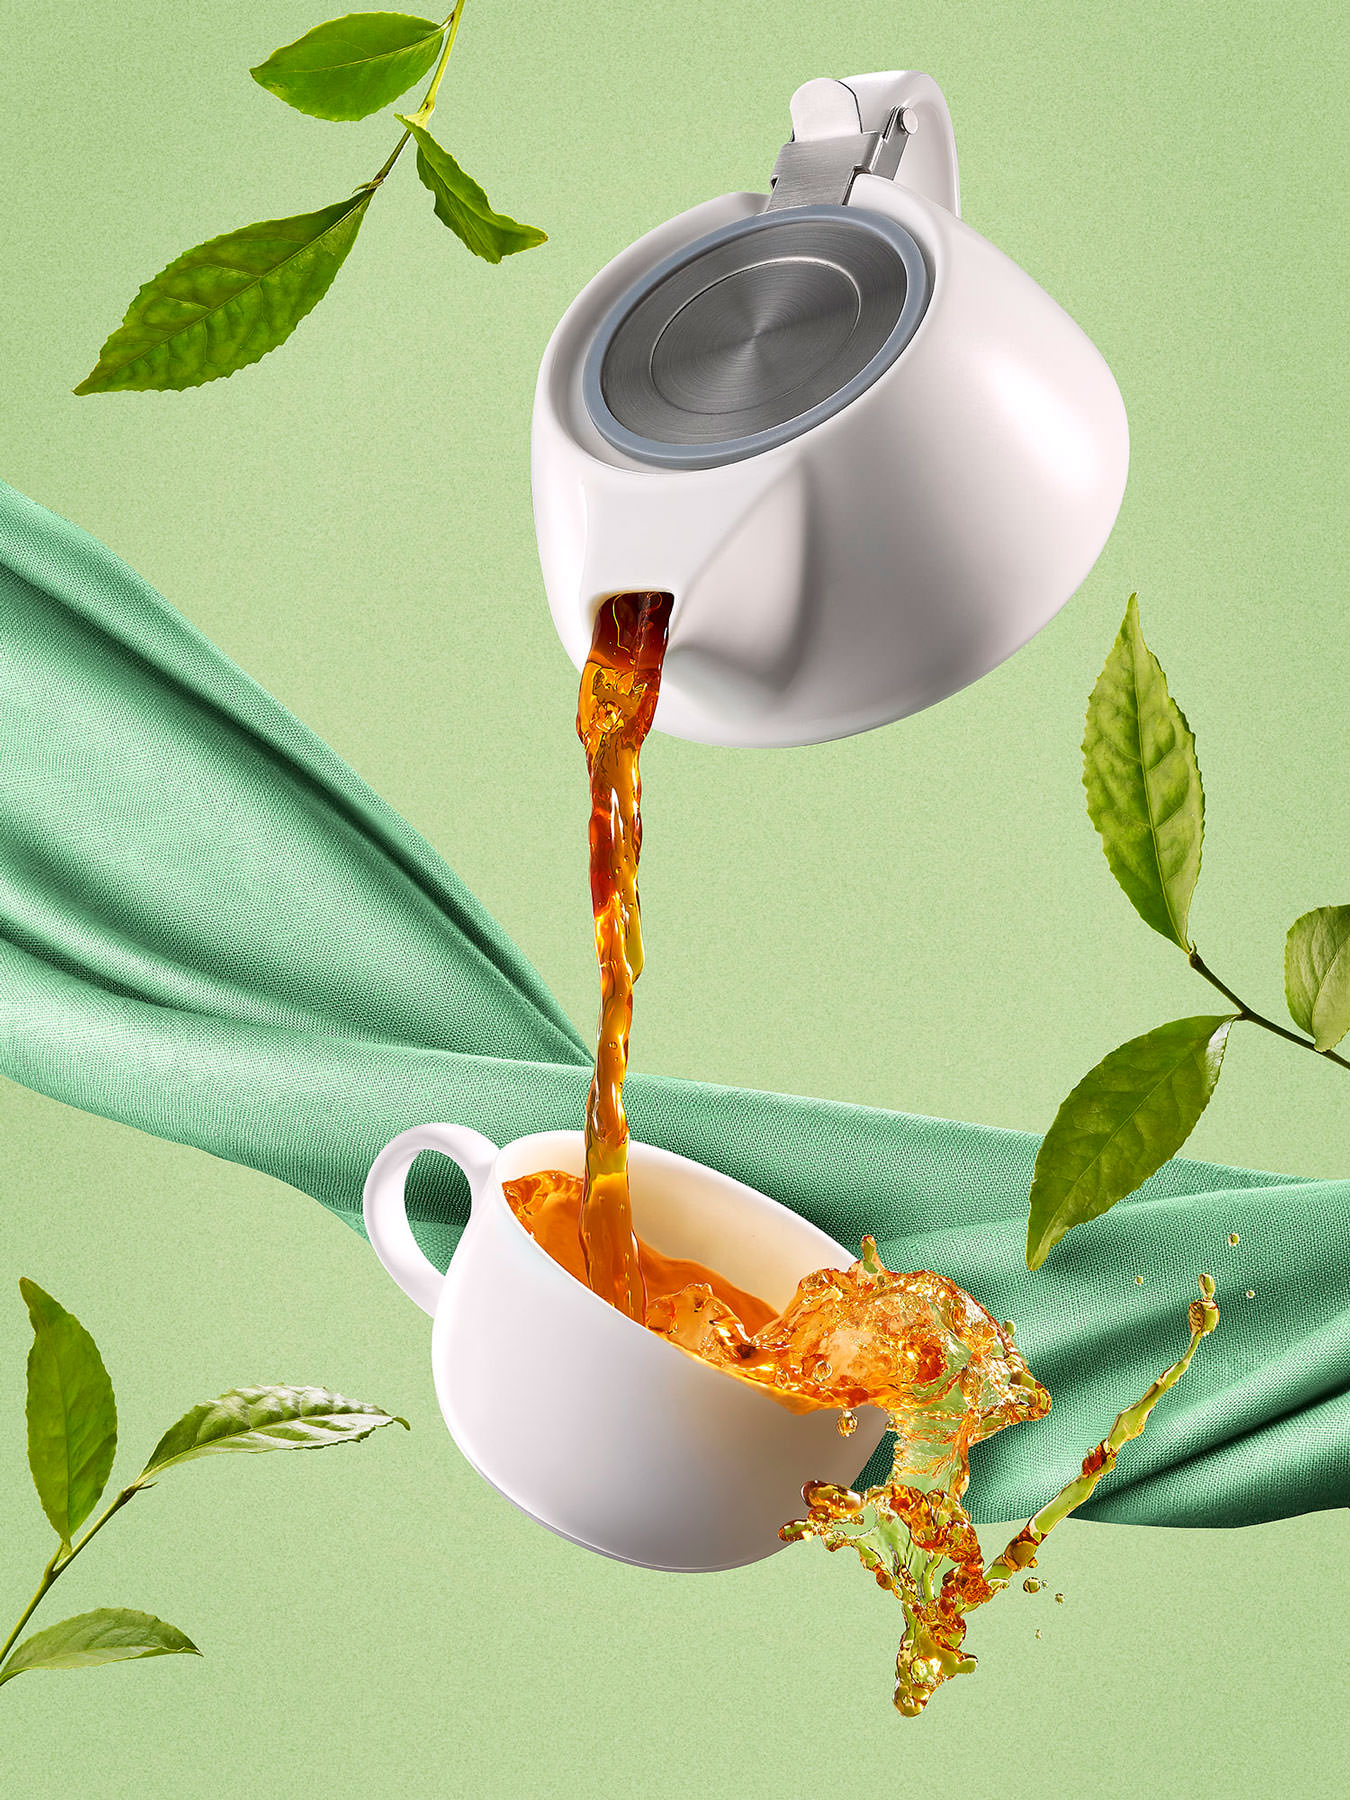 Tea pot pouring tea into a cup in mid air. Tea cup overflowing set on a green background - London Food & Drinks Photographer